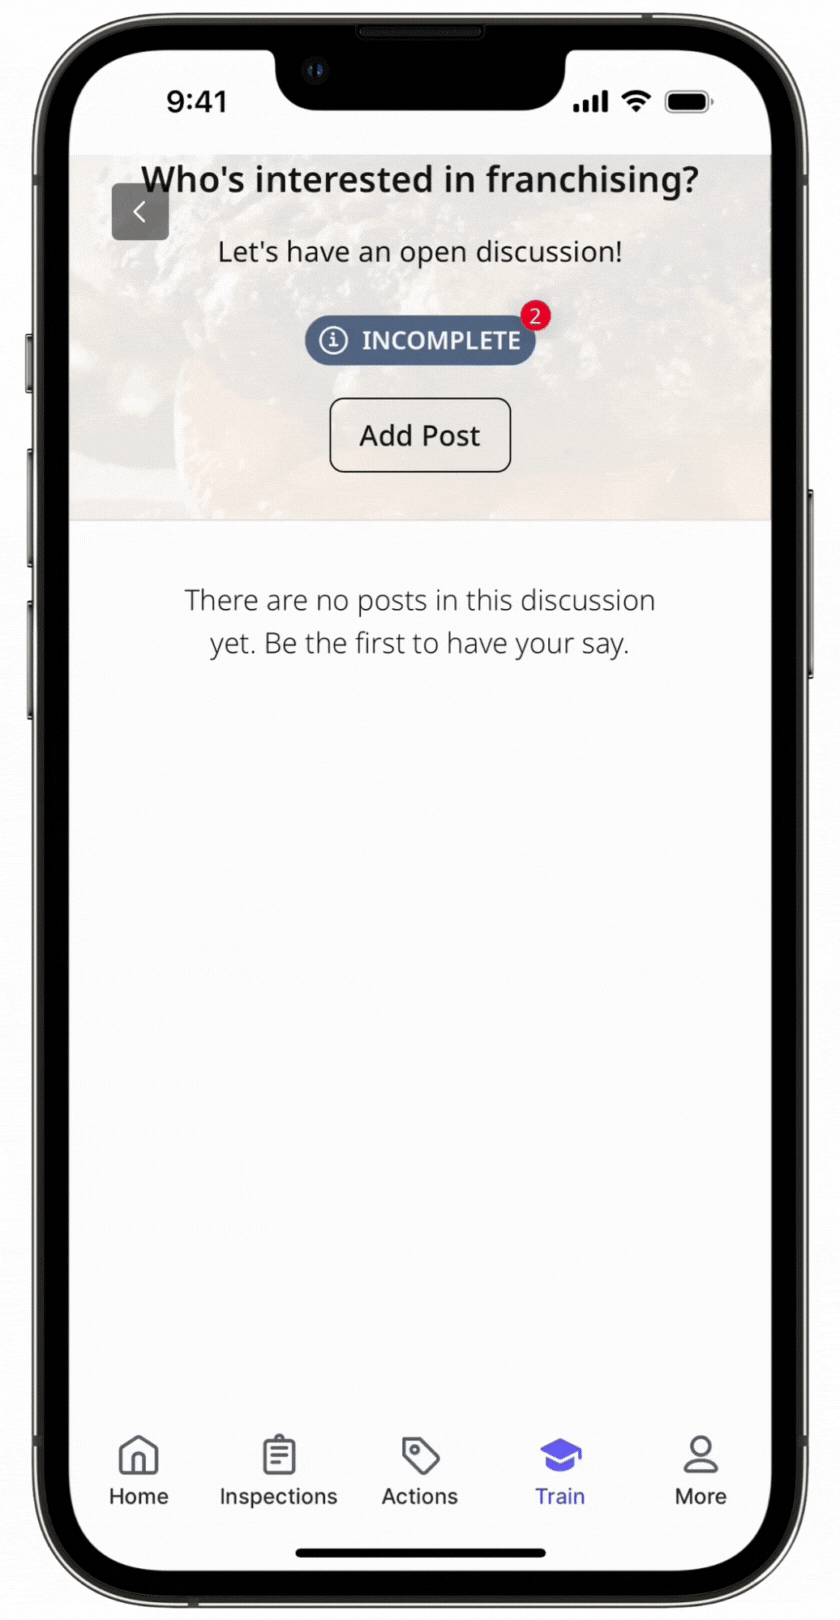 Interact with the discussion lesson type via the mobile app.